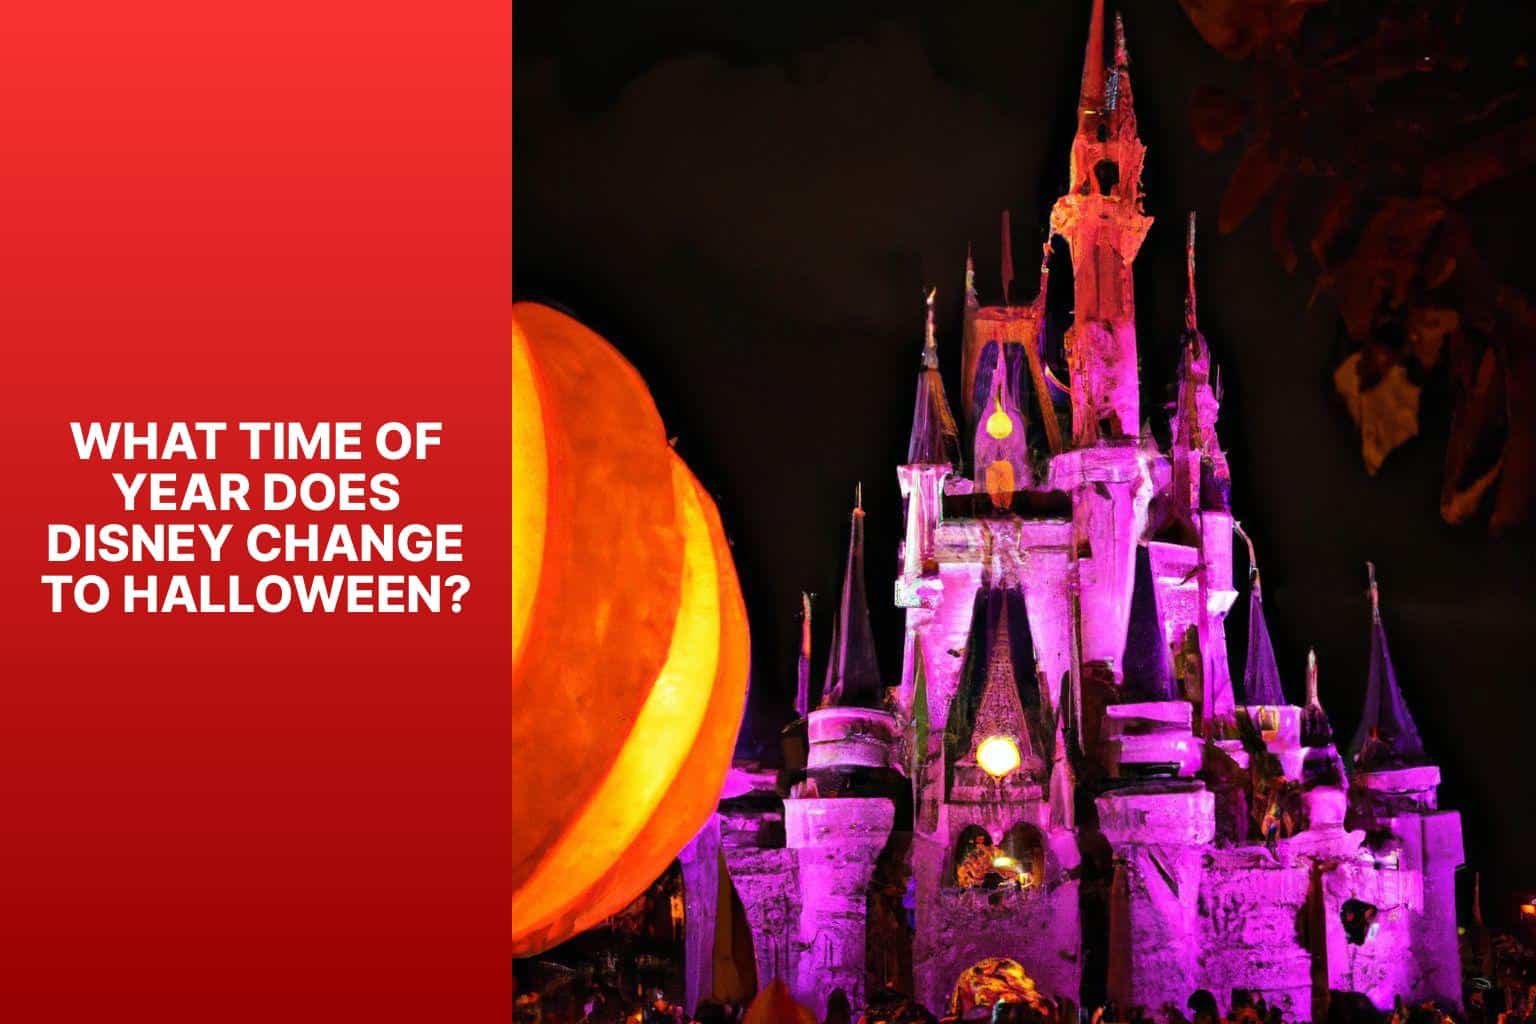 What Time of Year Does Disney Change to Halloween? - when does disney change to halloween 